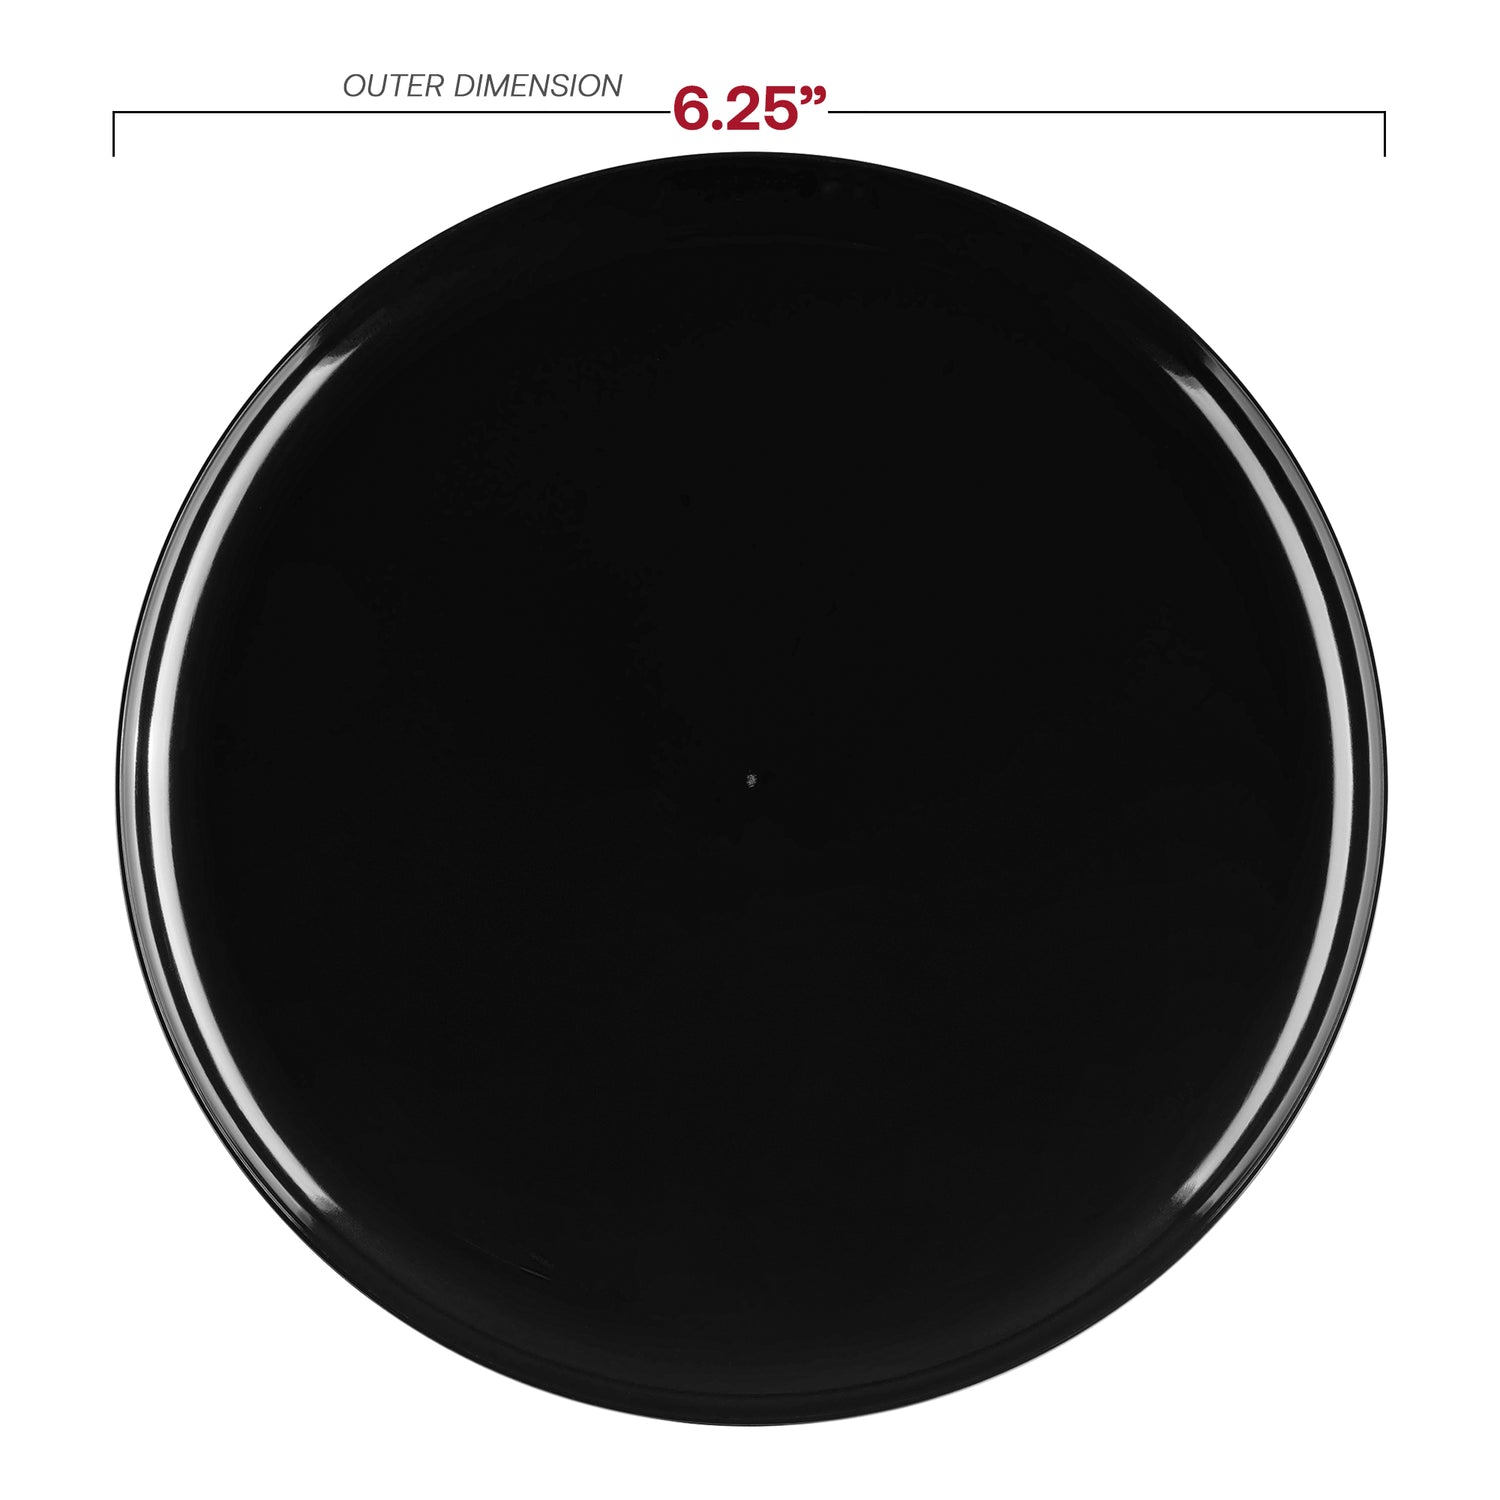 Black Flat Round Disposable Plastic Pastry Plates (6.25") Dimension | The Kaya Collection